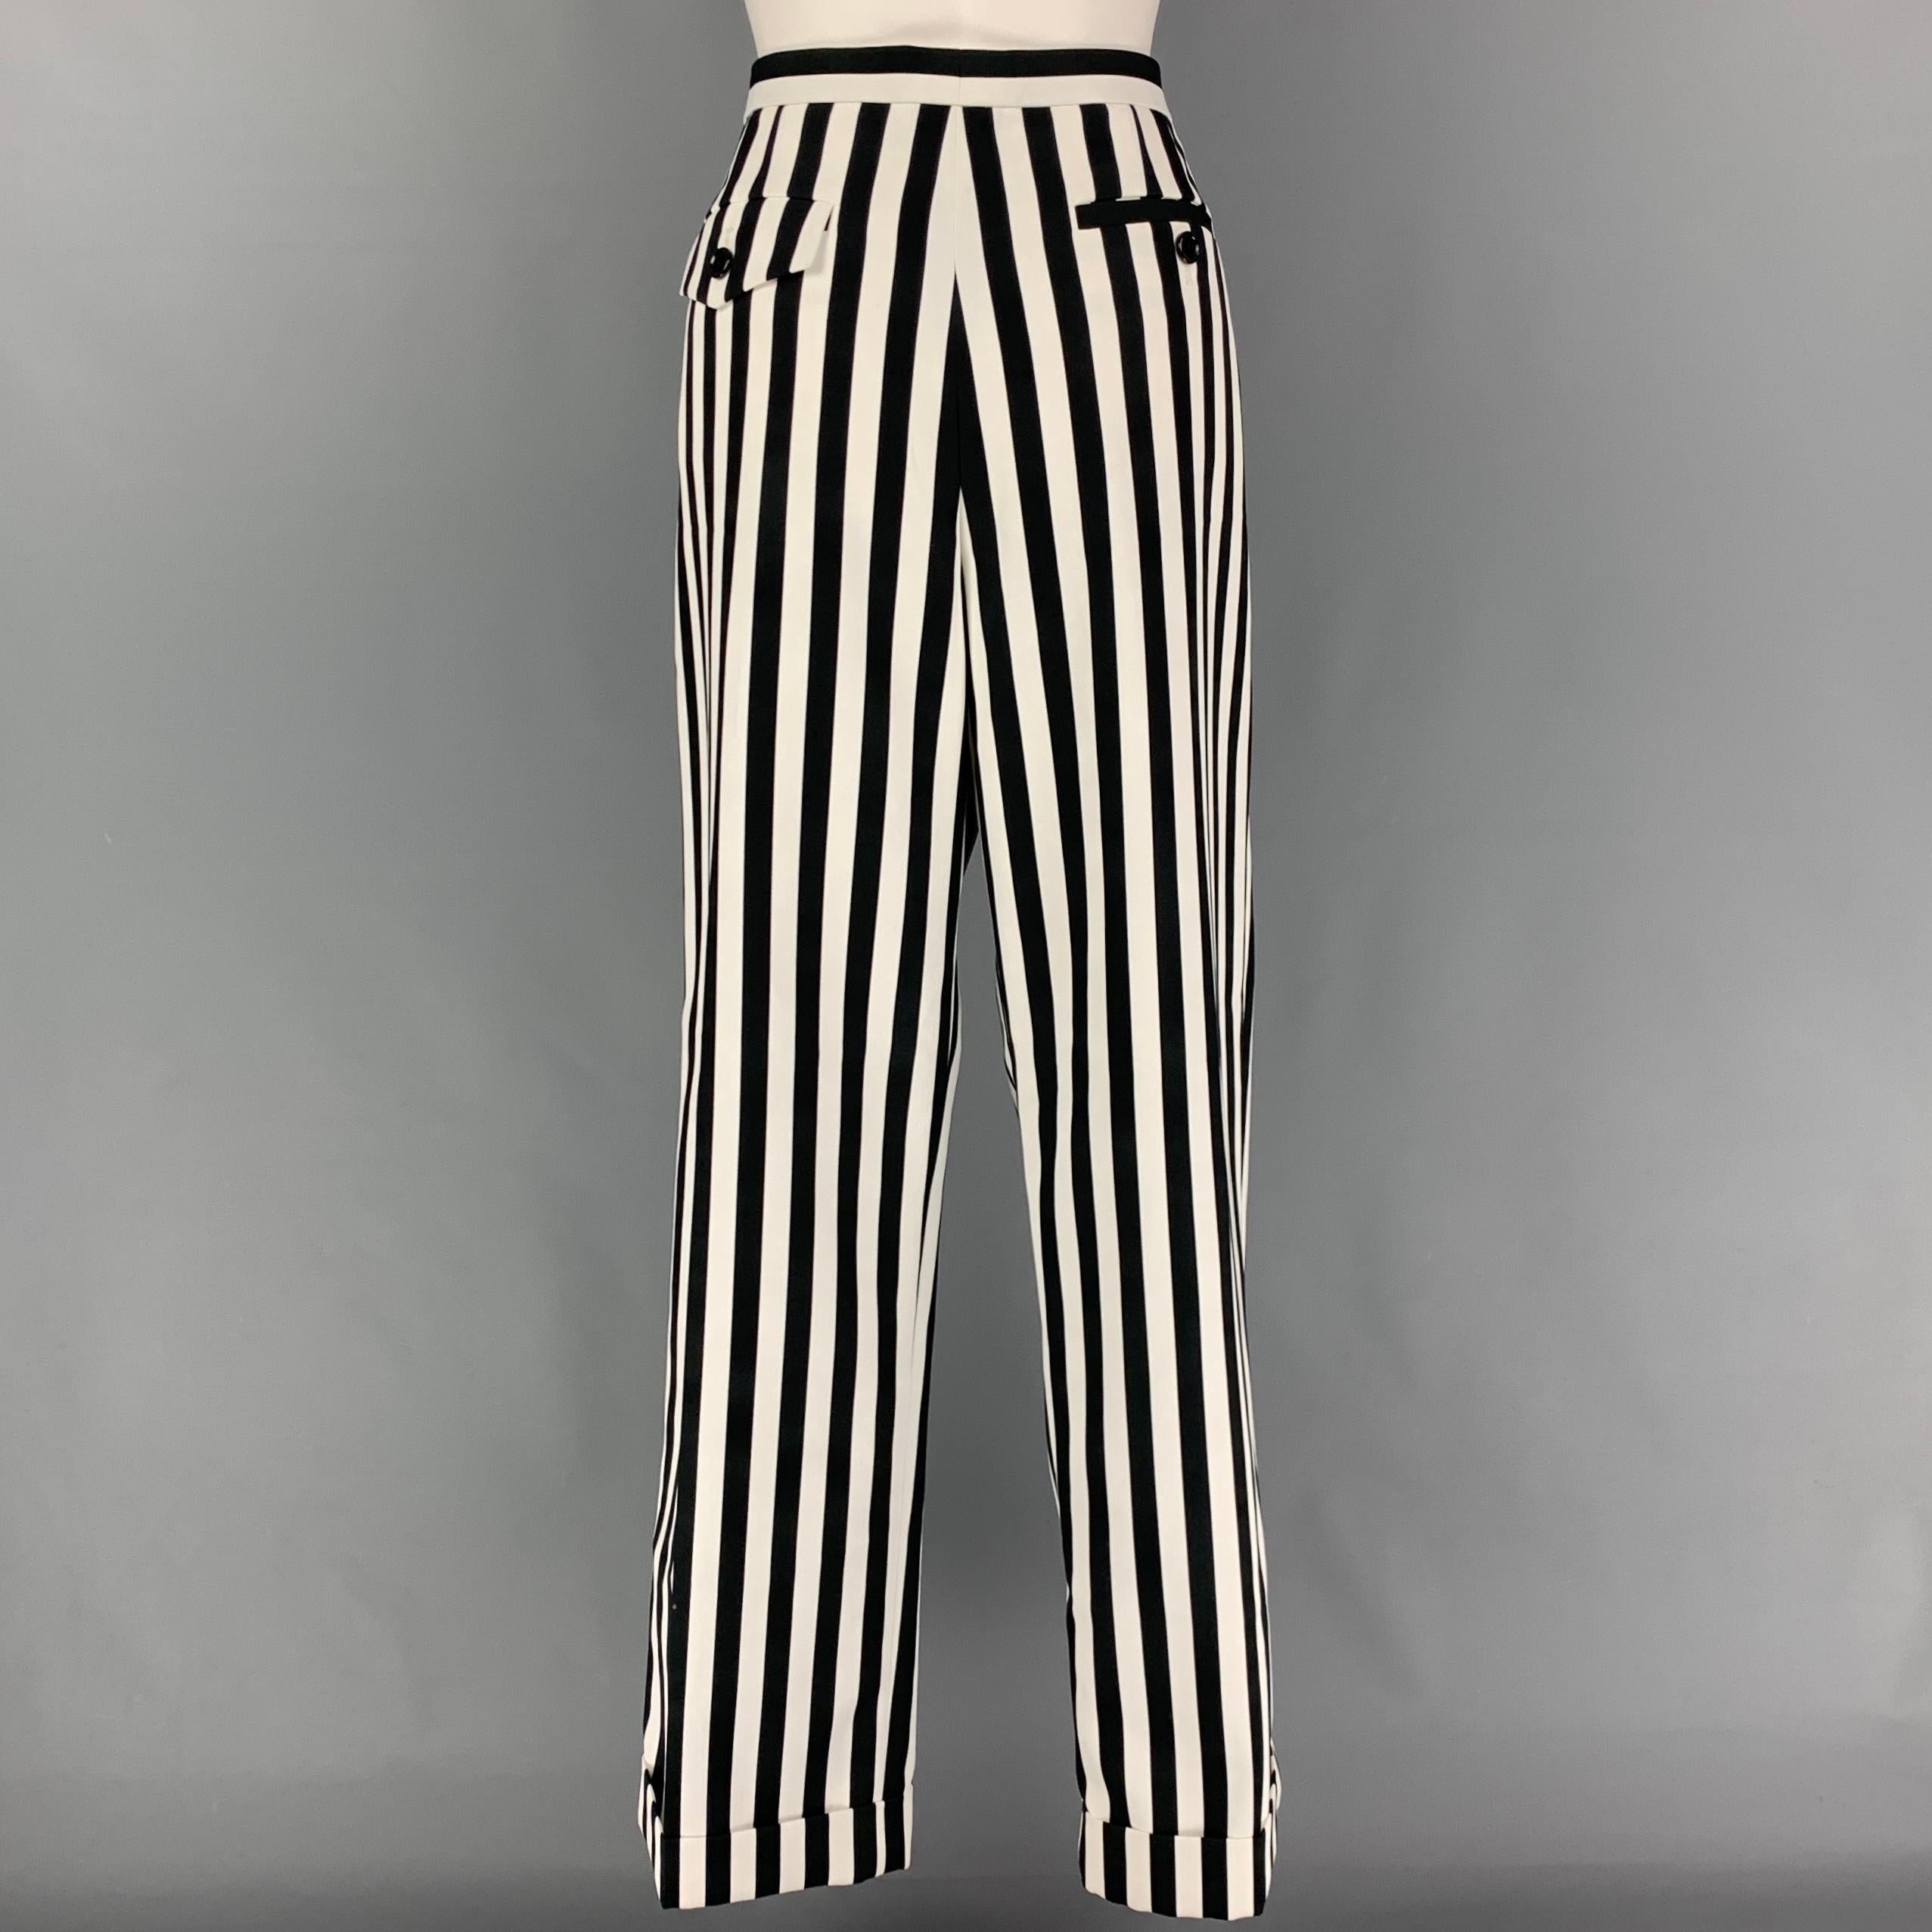 MARC JACOBS dress pants comes in a black & white stripe polyester with a silk liner featuring a wide leg style, cuffed leg, front tab, and a zip fly closure. Made in USA.

New With Tags.
Marked: 12
Original Retail Price: